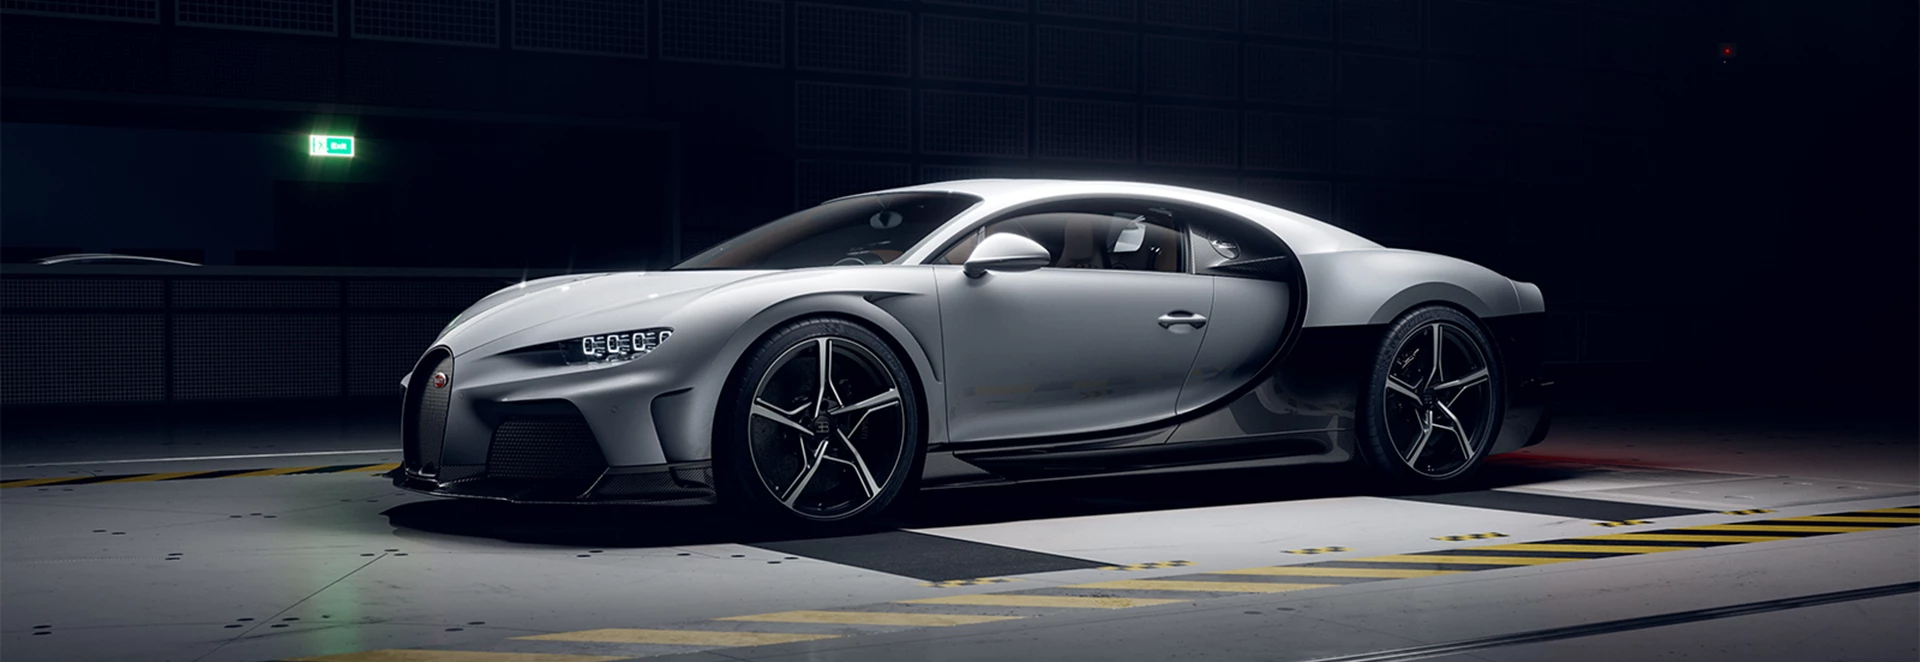 £2.75m Bugatti Chiron Super Sport hypercar revealed with 273mph top speed 